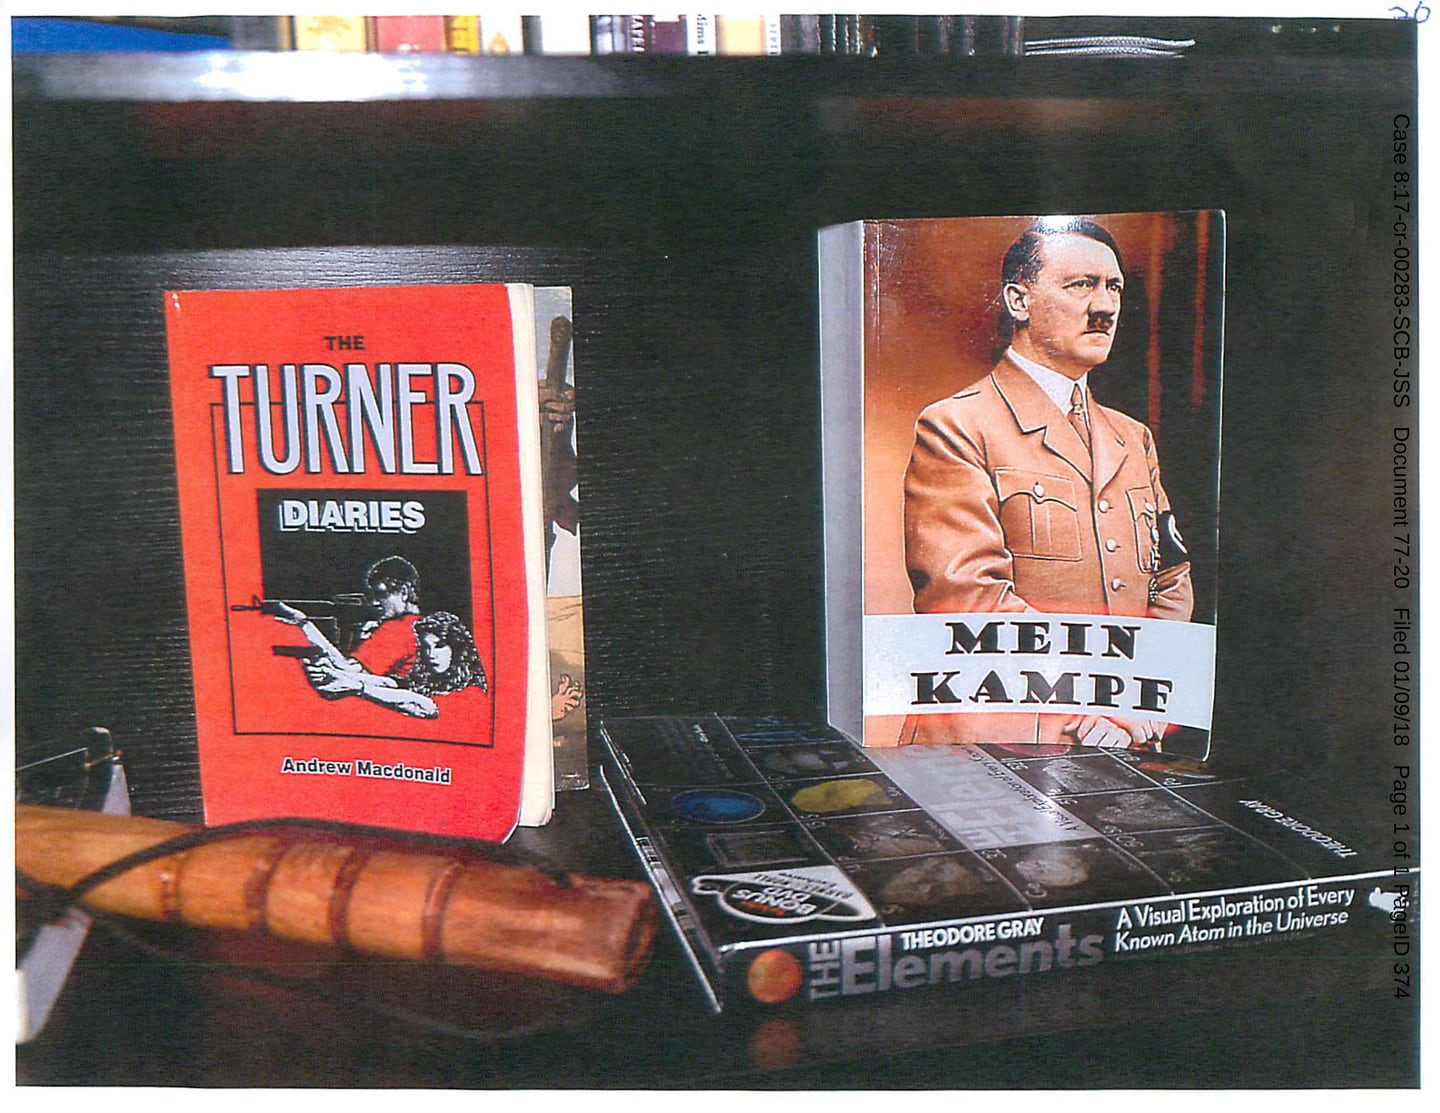 Copies of The Turner Diaries and Mein Kampf found in Brandon Russell's garage.